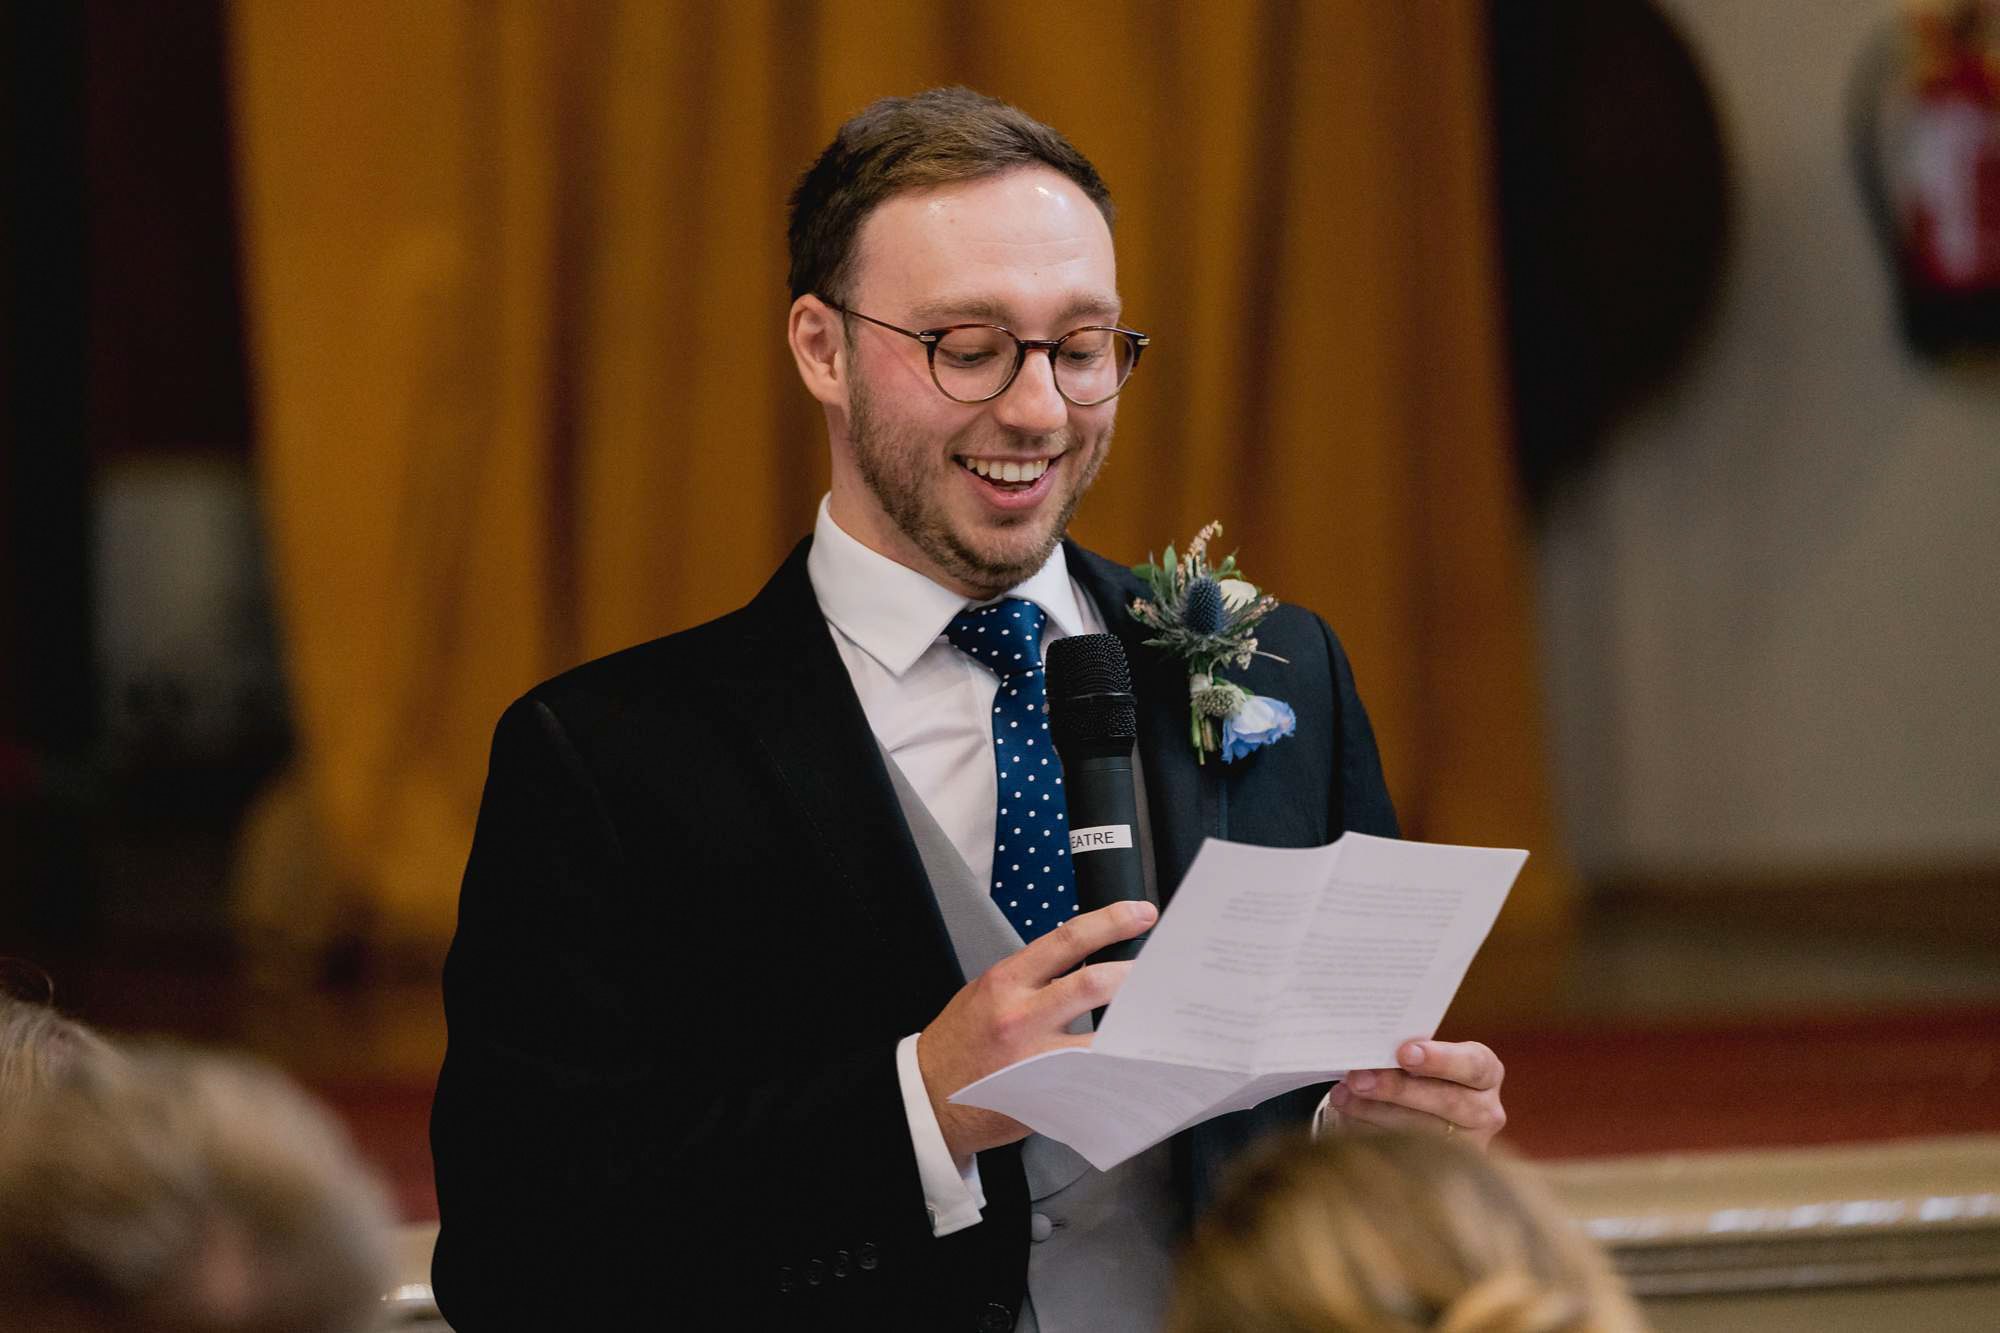 Groom delivers his speech at a wedding at Salomons Estate in Tunbridge Wells.